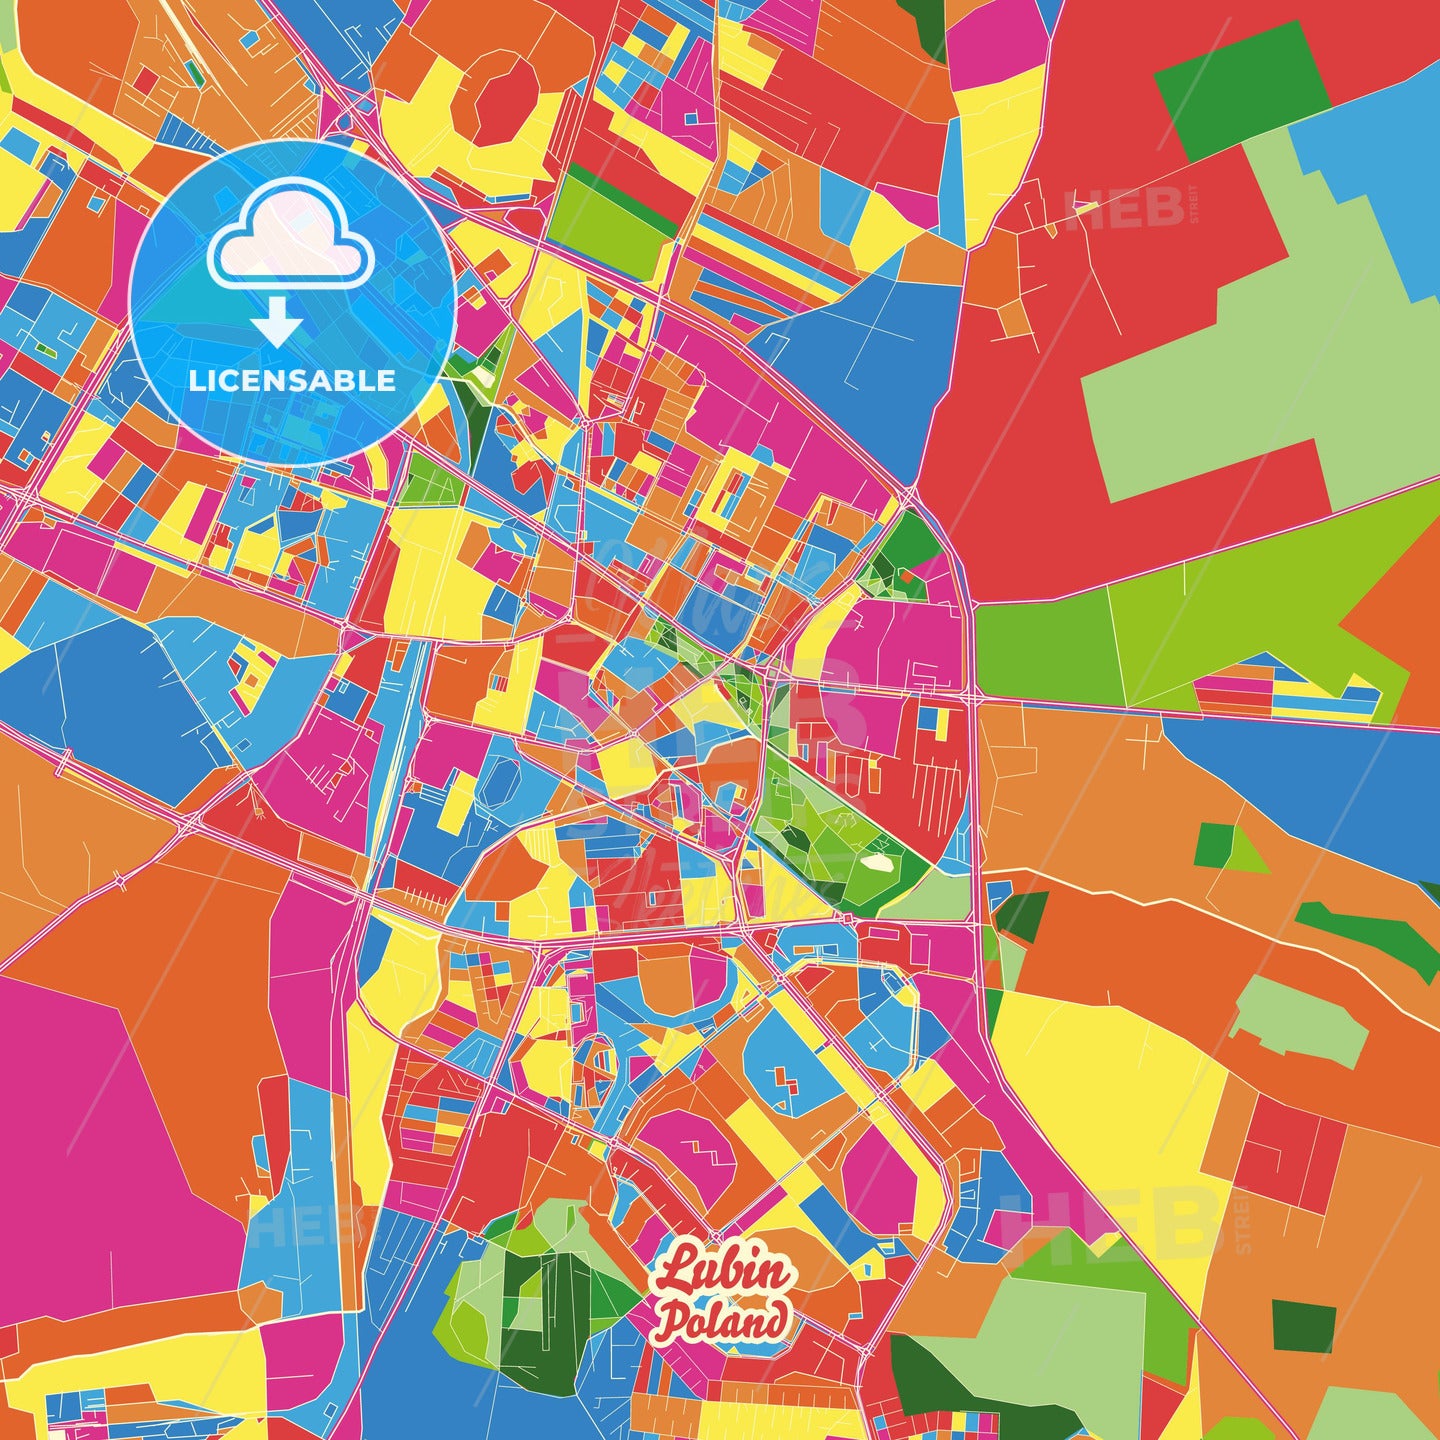 Lubin, Poland Crazy Colorful Street Map Poster Template - HEBSTREITS Sketches